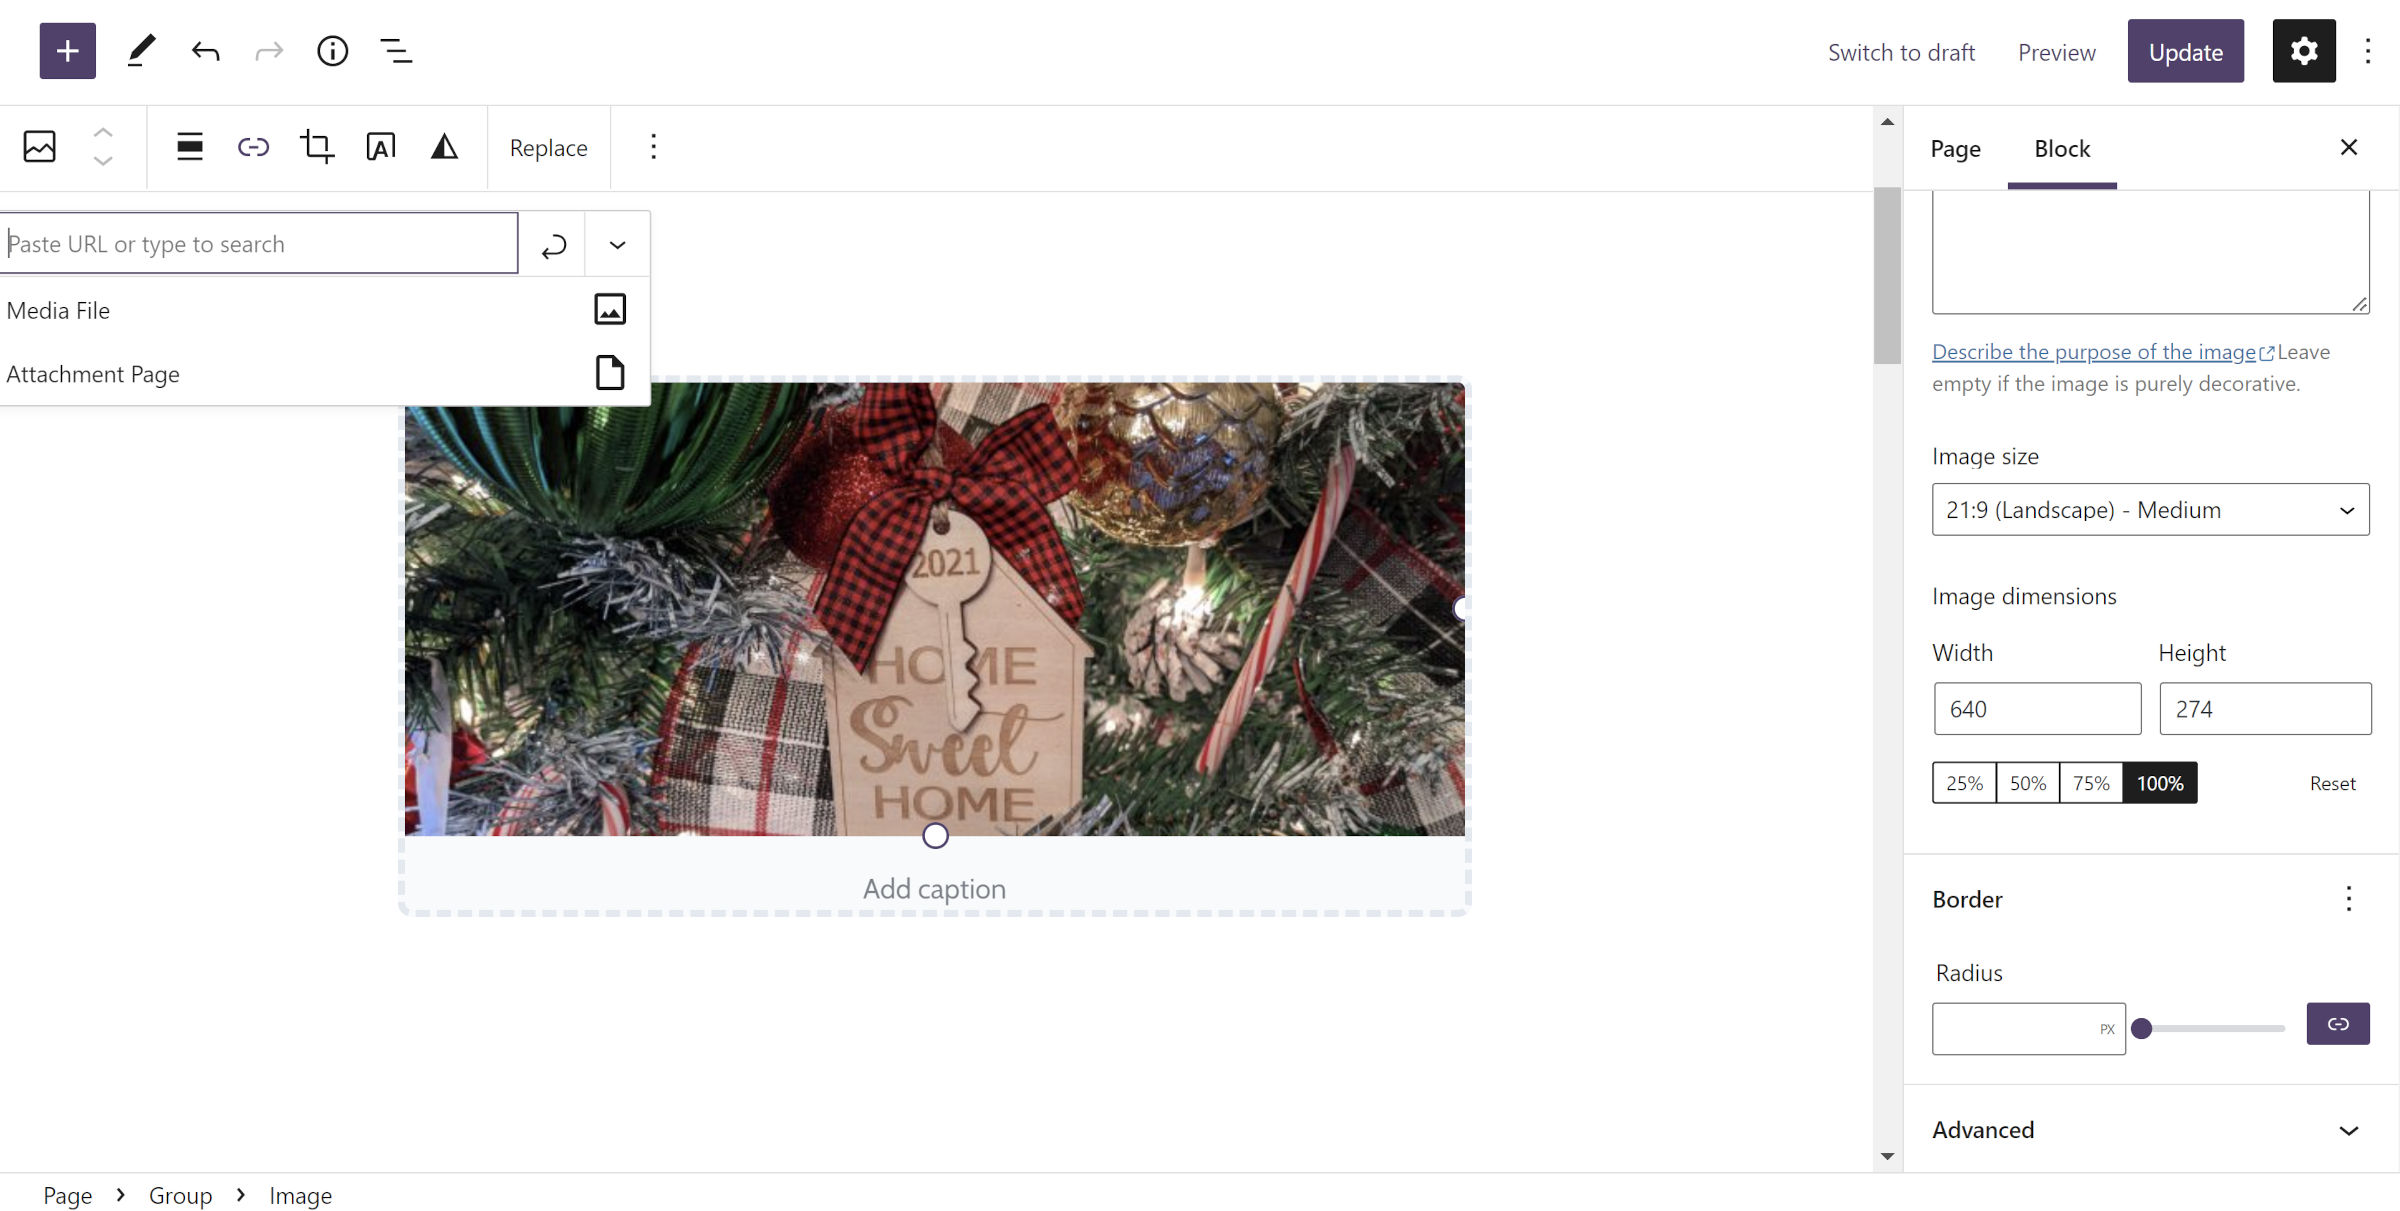 WordPress post editor with an image hosted inside a Group block with a gray border and background.